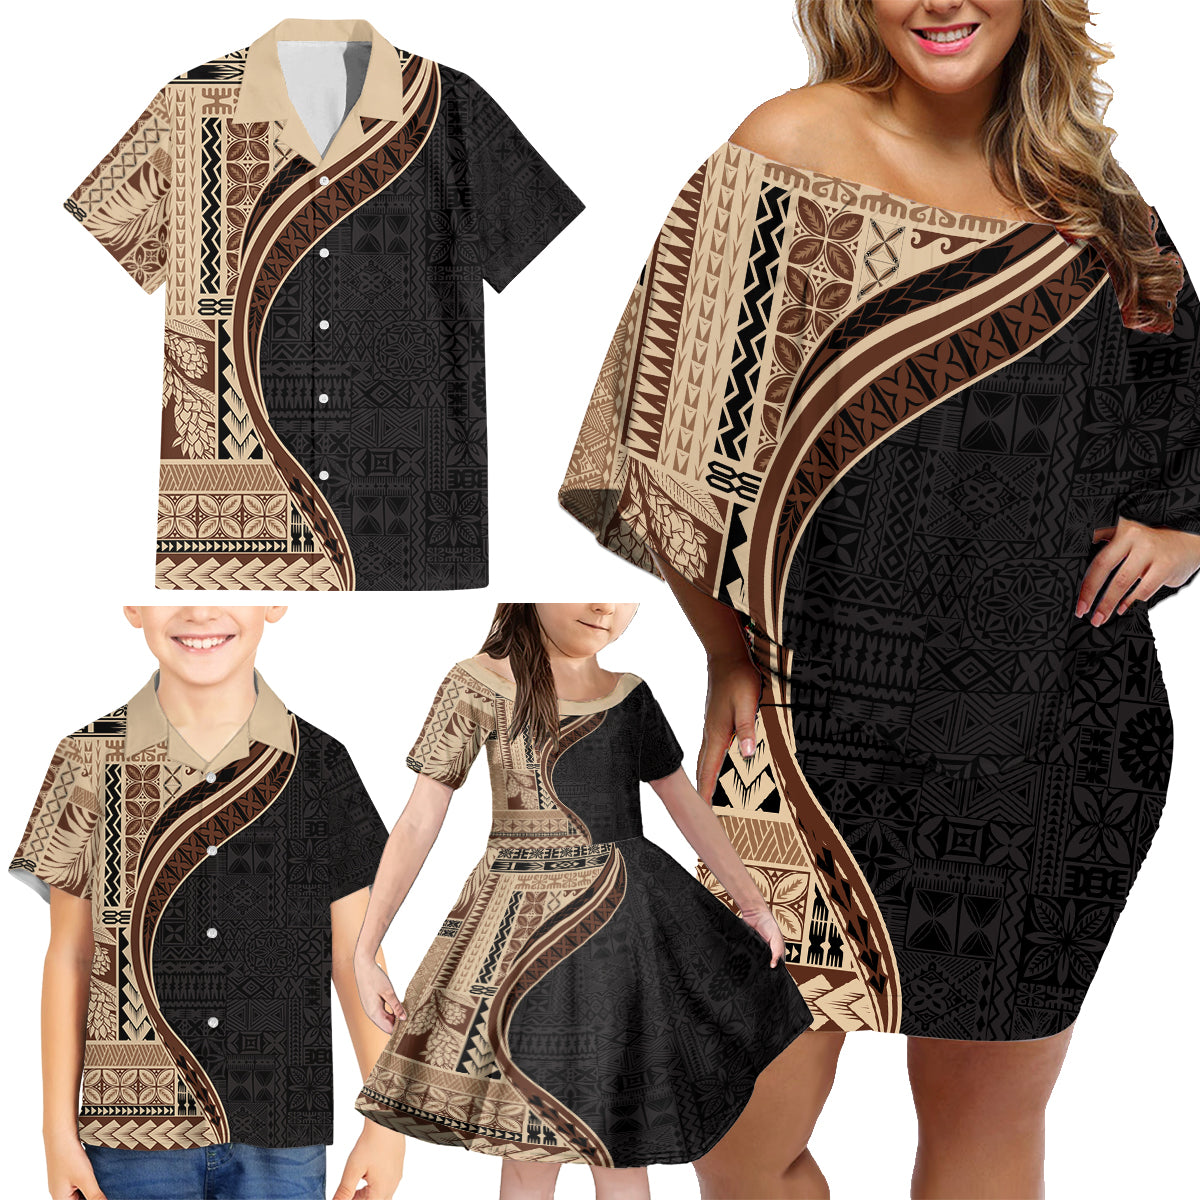 Samoa Siapo Motif and Tapa Pattern Half Style Family Matching Off Shoulder Short Dress and Hawaiian Shirt Beige Color